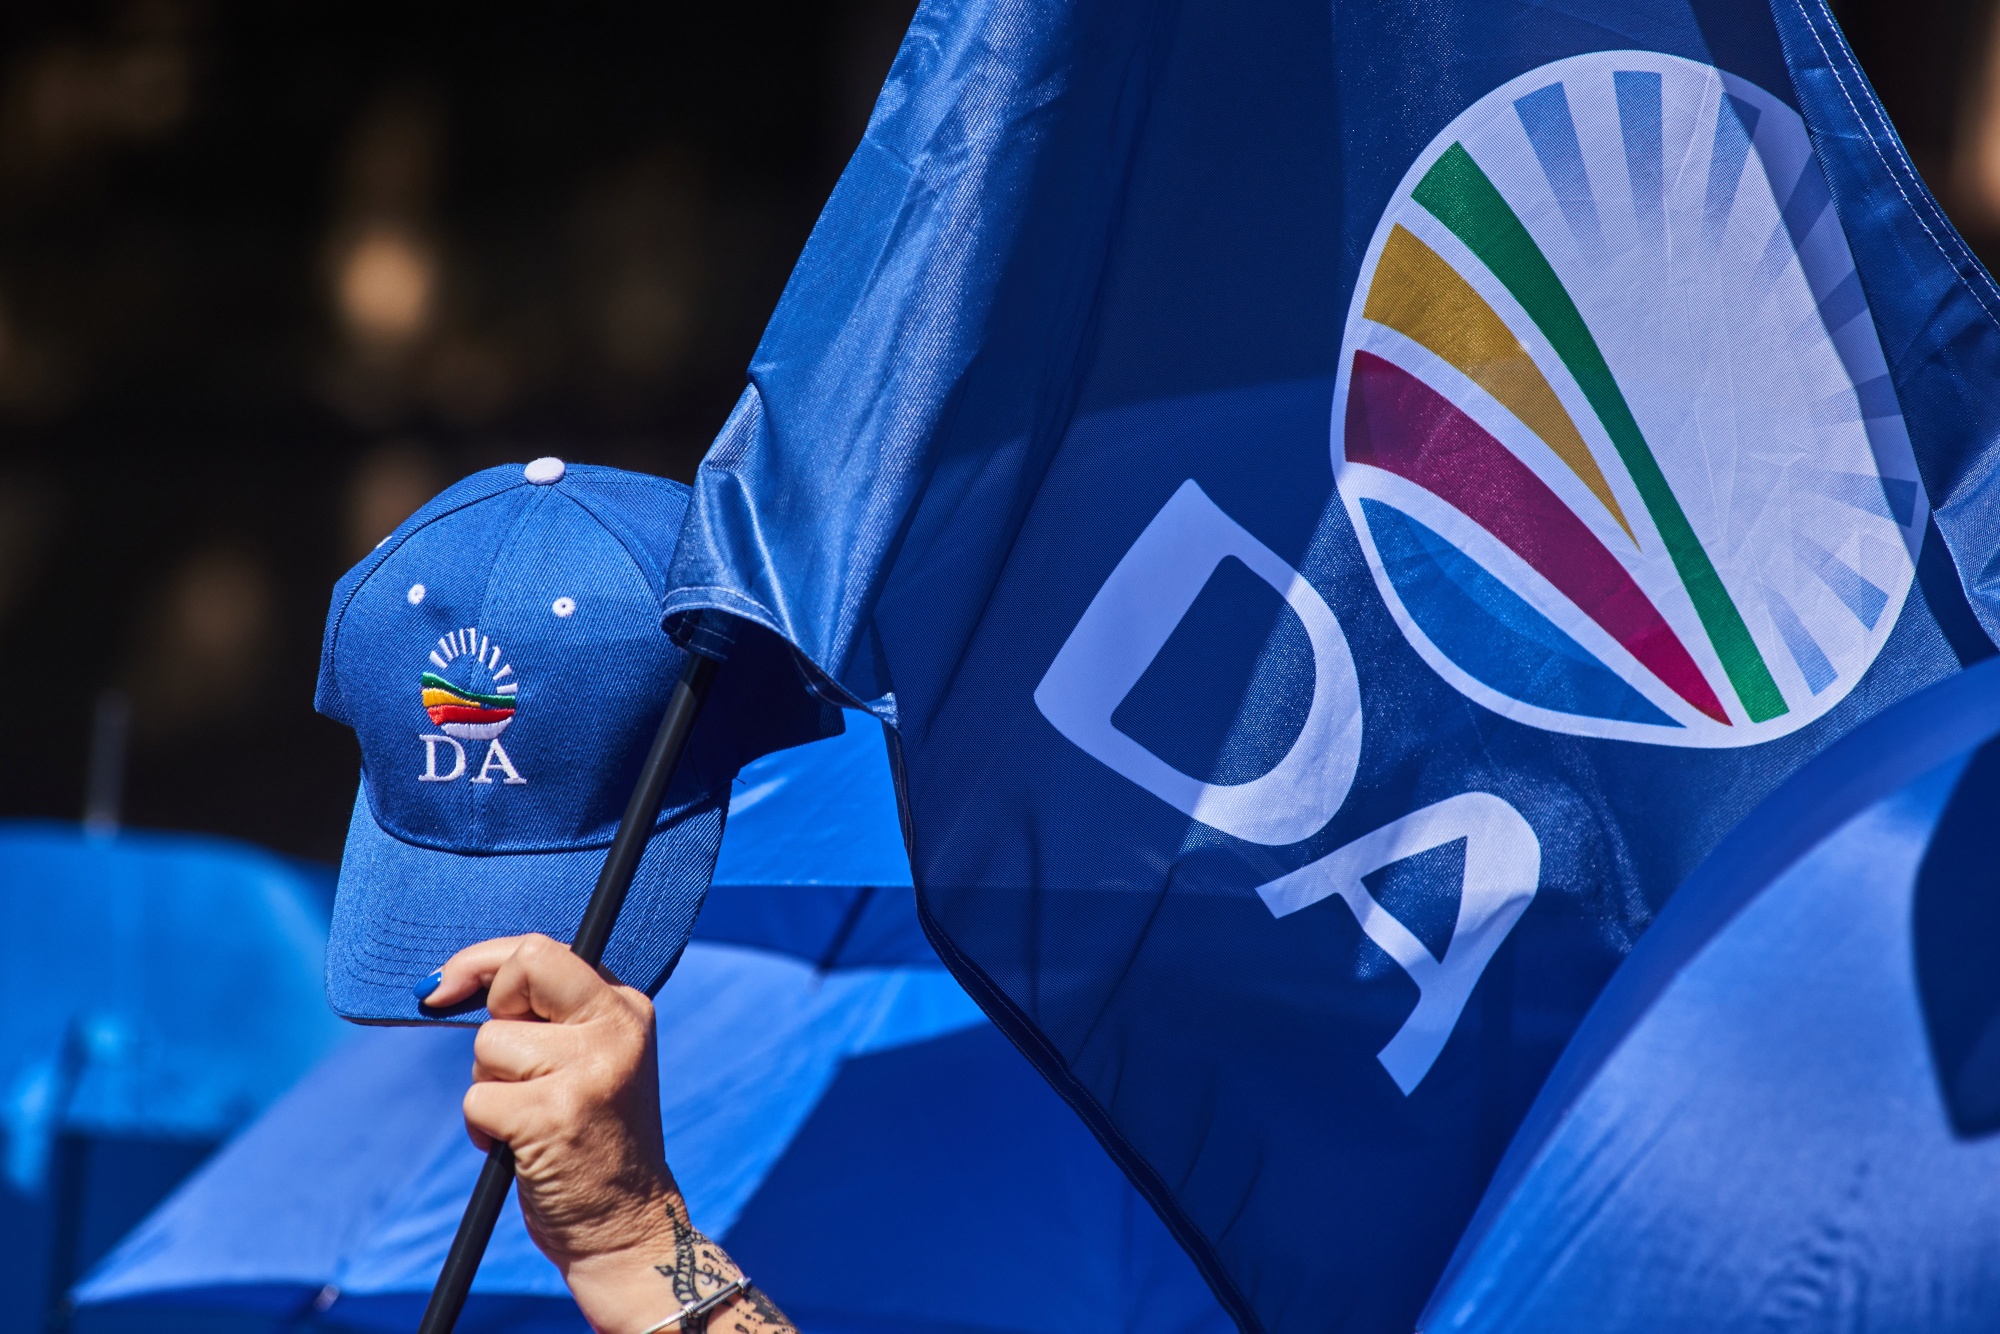 DA Ministers outperform their ANC counterparts- Chin’ono